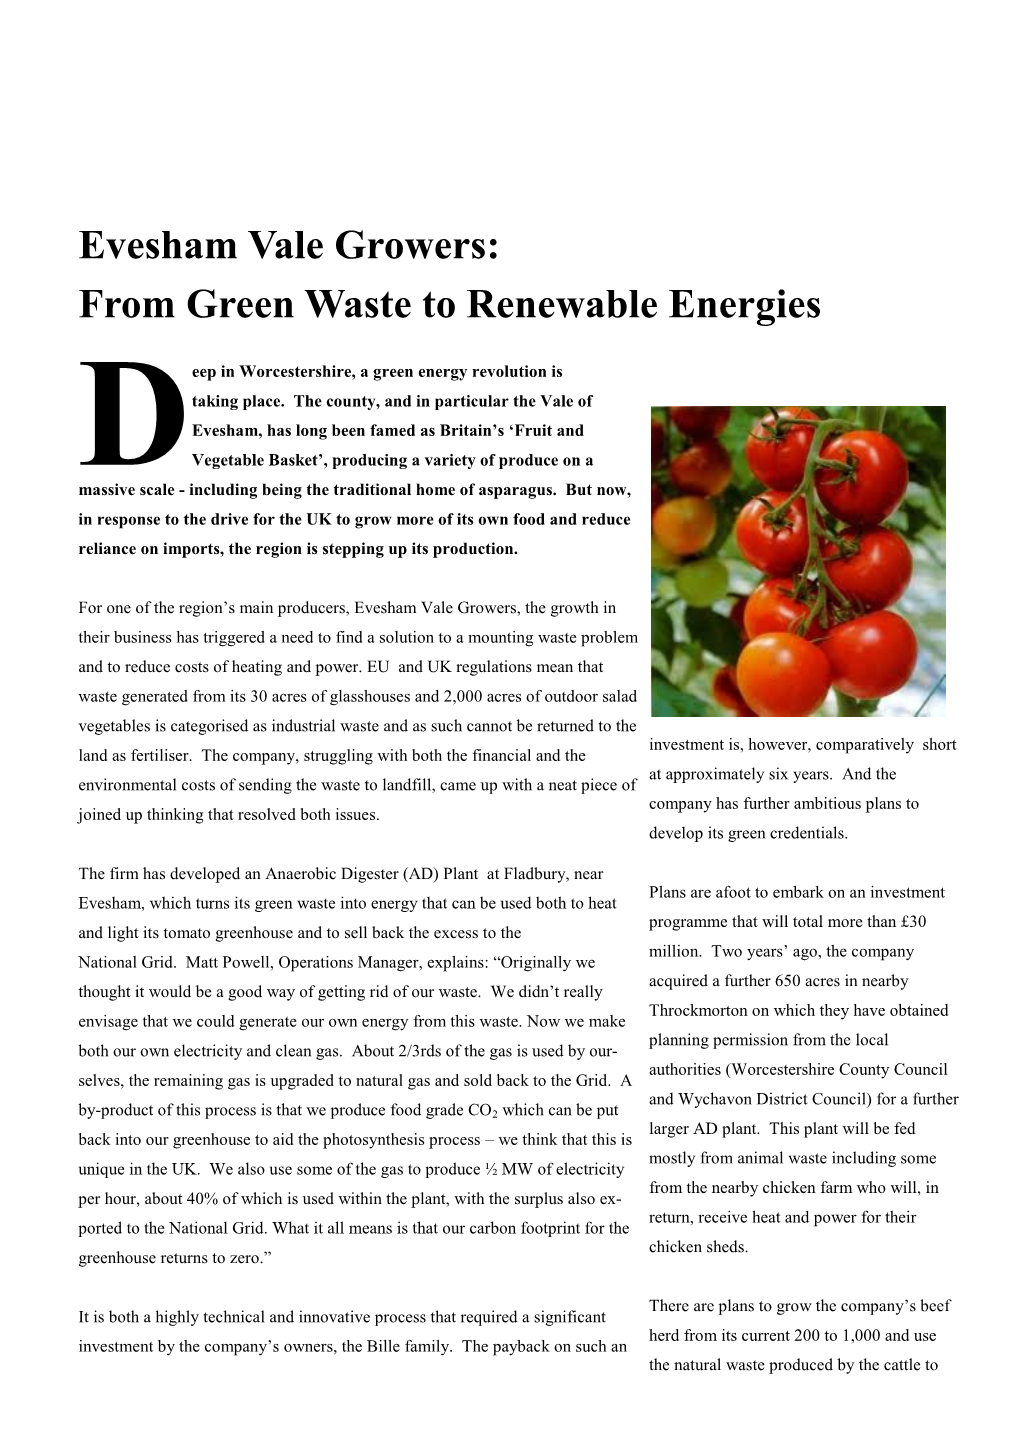 Evesham Vale Growers: from Green Waste to Renewable Energies